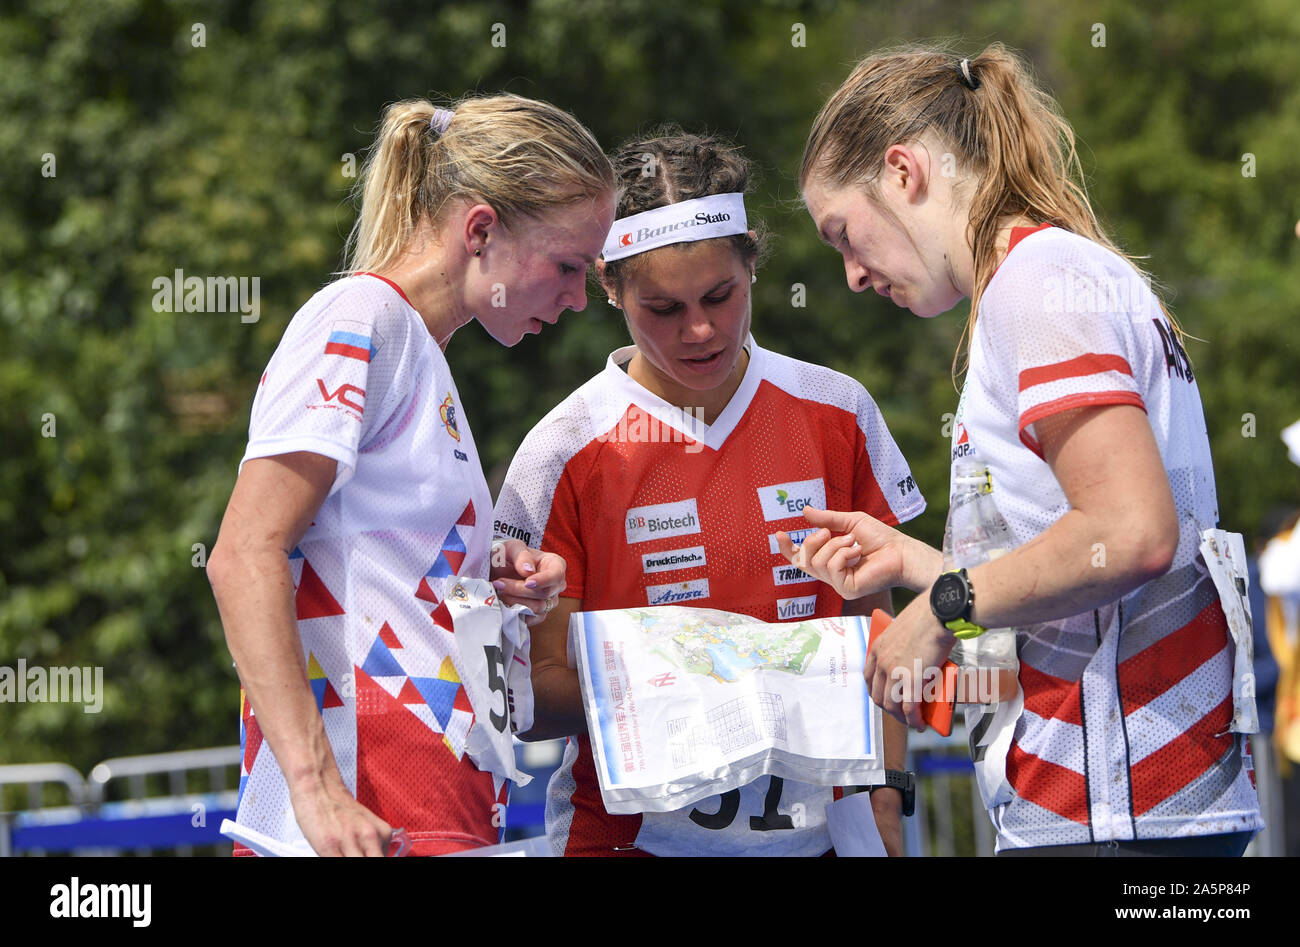 (191022) -- WUHAN, Oct. 22, 2019 (Xinhua) -- Gold medalist Anastasiia Rudnaia(L) of Russia, silver medalist Ursula Kadan (R) of Austria and bronze medalist Elena Roos of Switzerland communicate after finishing the women's individual long distance final of orienteering at the 7th International Military Sports Council (CISM) Military World Games in Wuhan, capital of central China's Hubei Province, Oct. 21, 2019. (Xinhua/Chen Yehua) Stock Photo